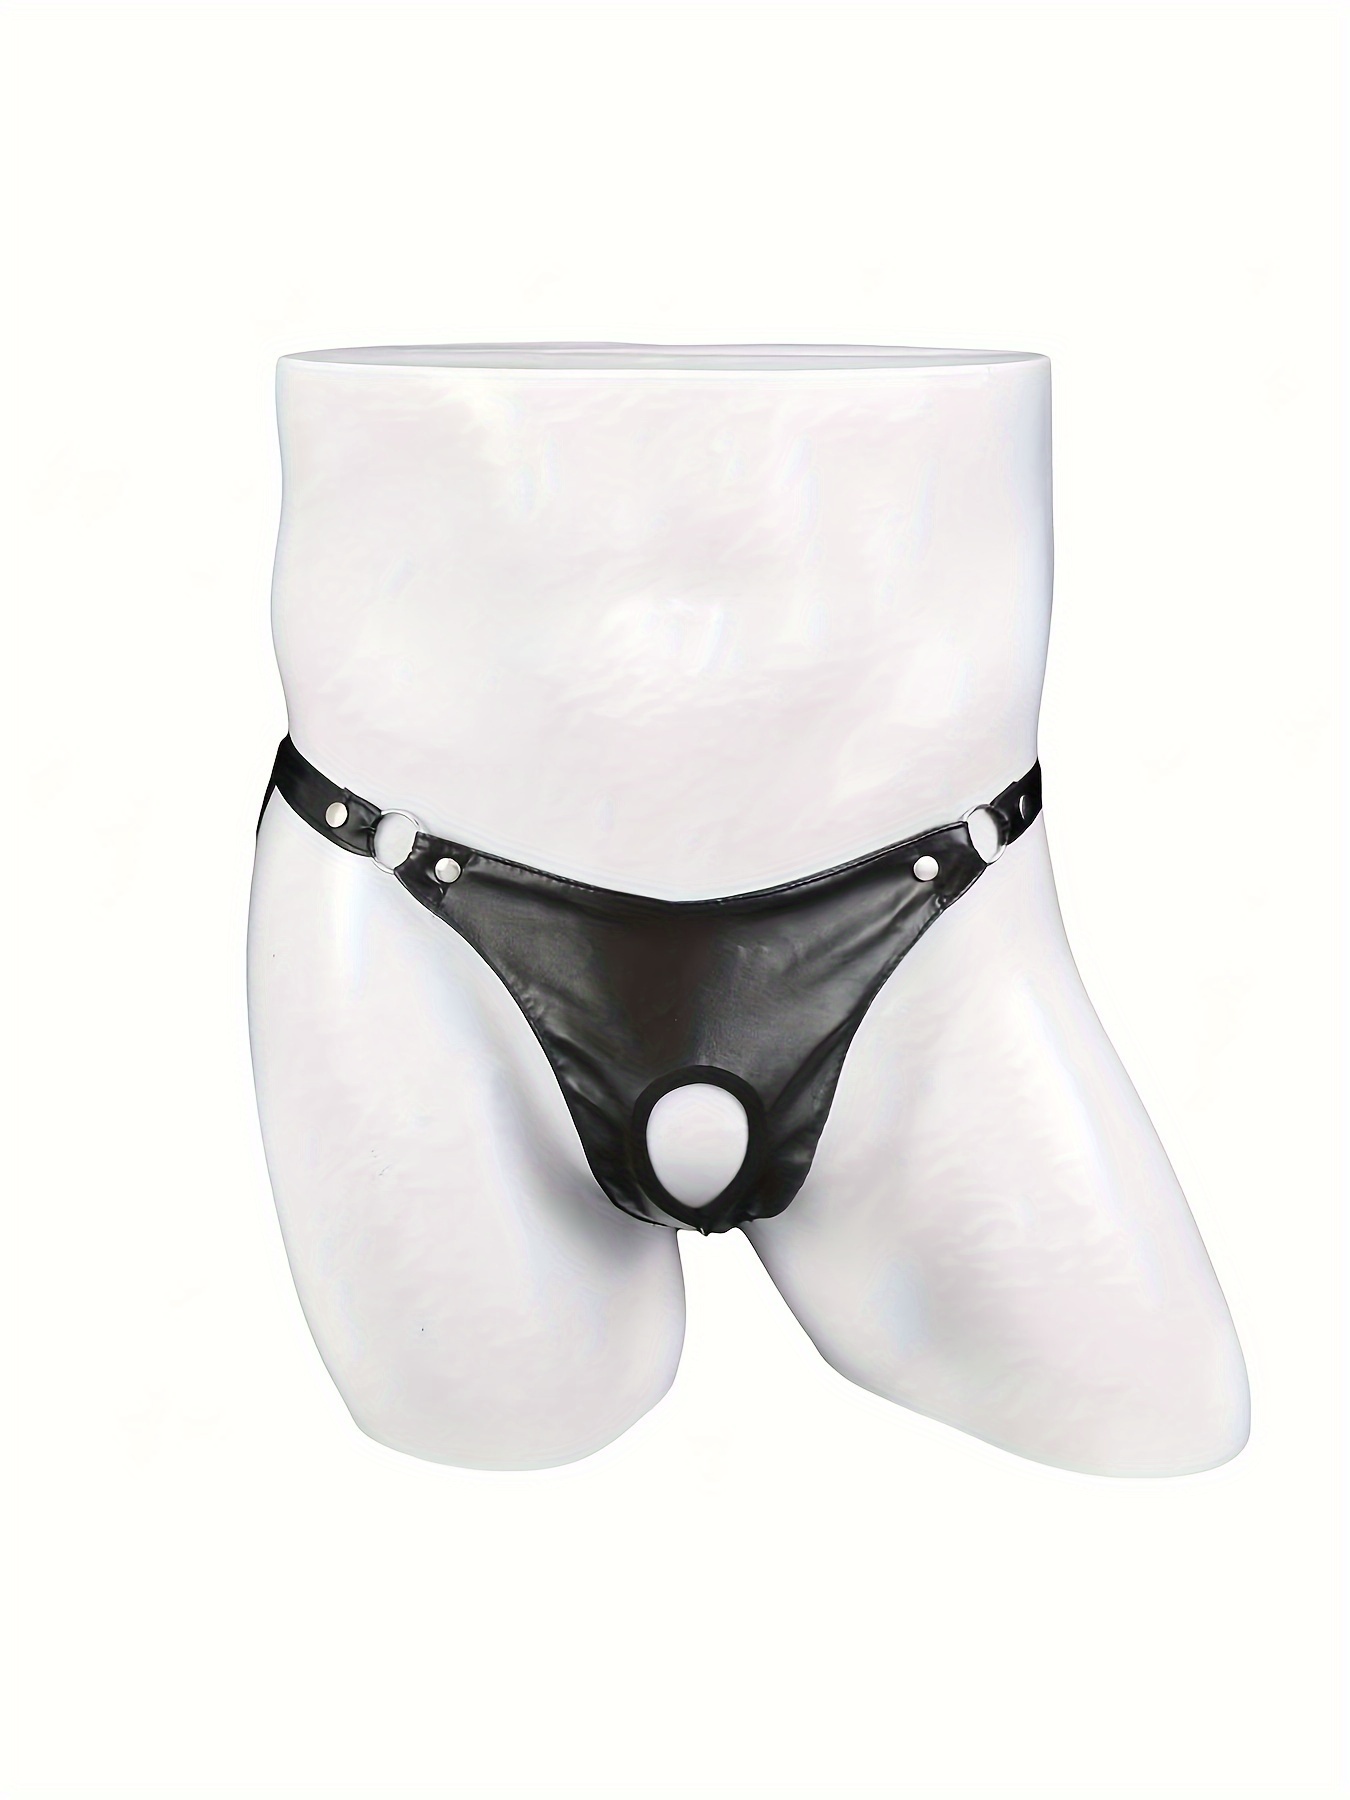 Sexy Mens Leather Zipper Open Front Thong Underwear G String T Back Black